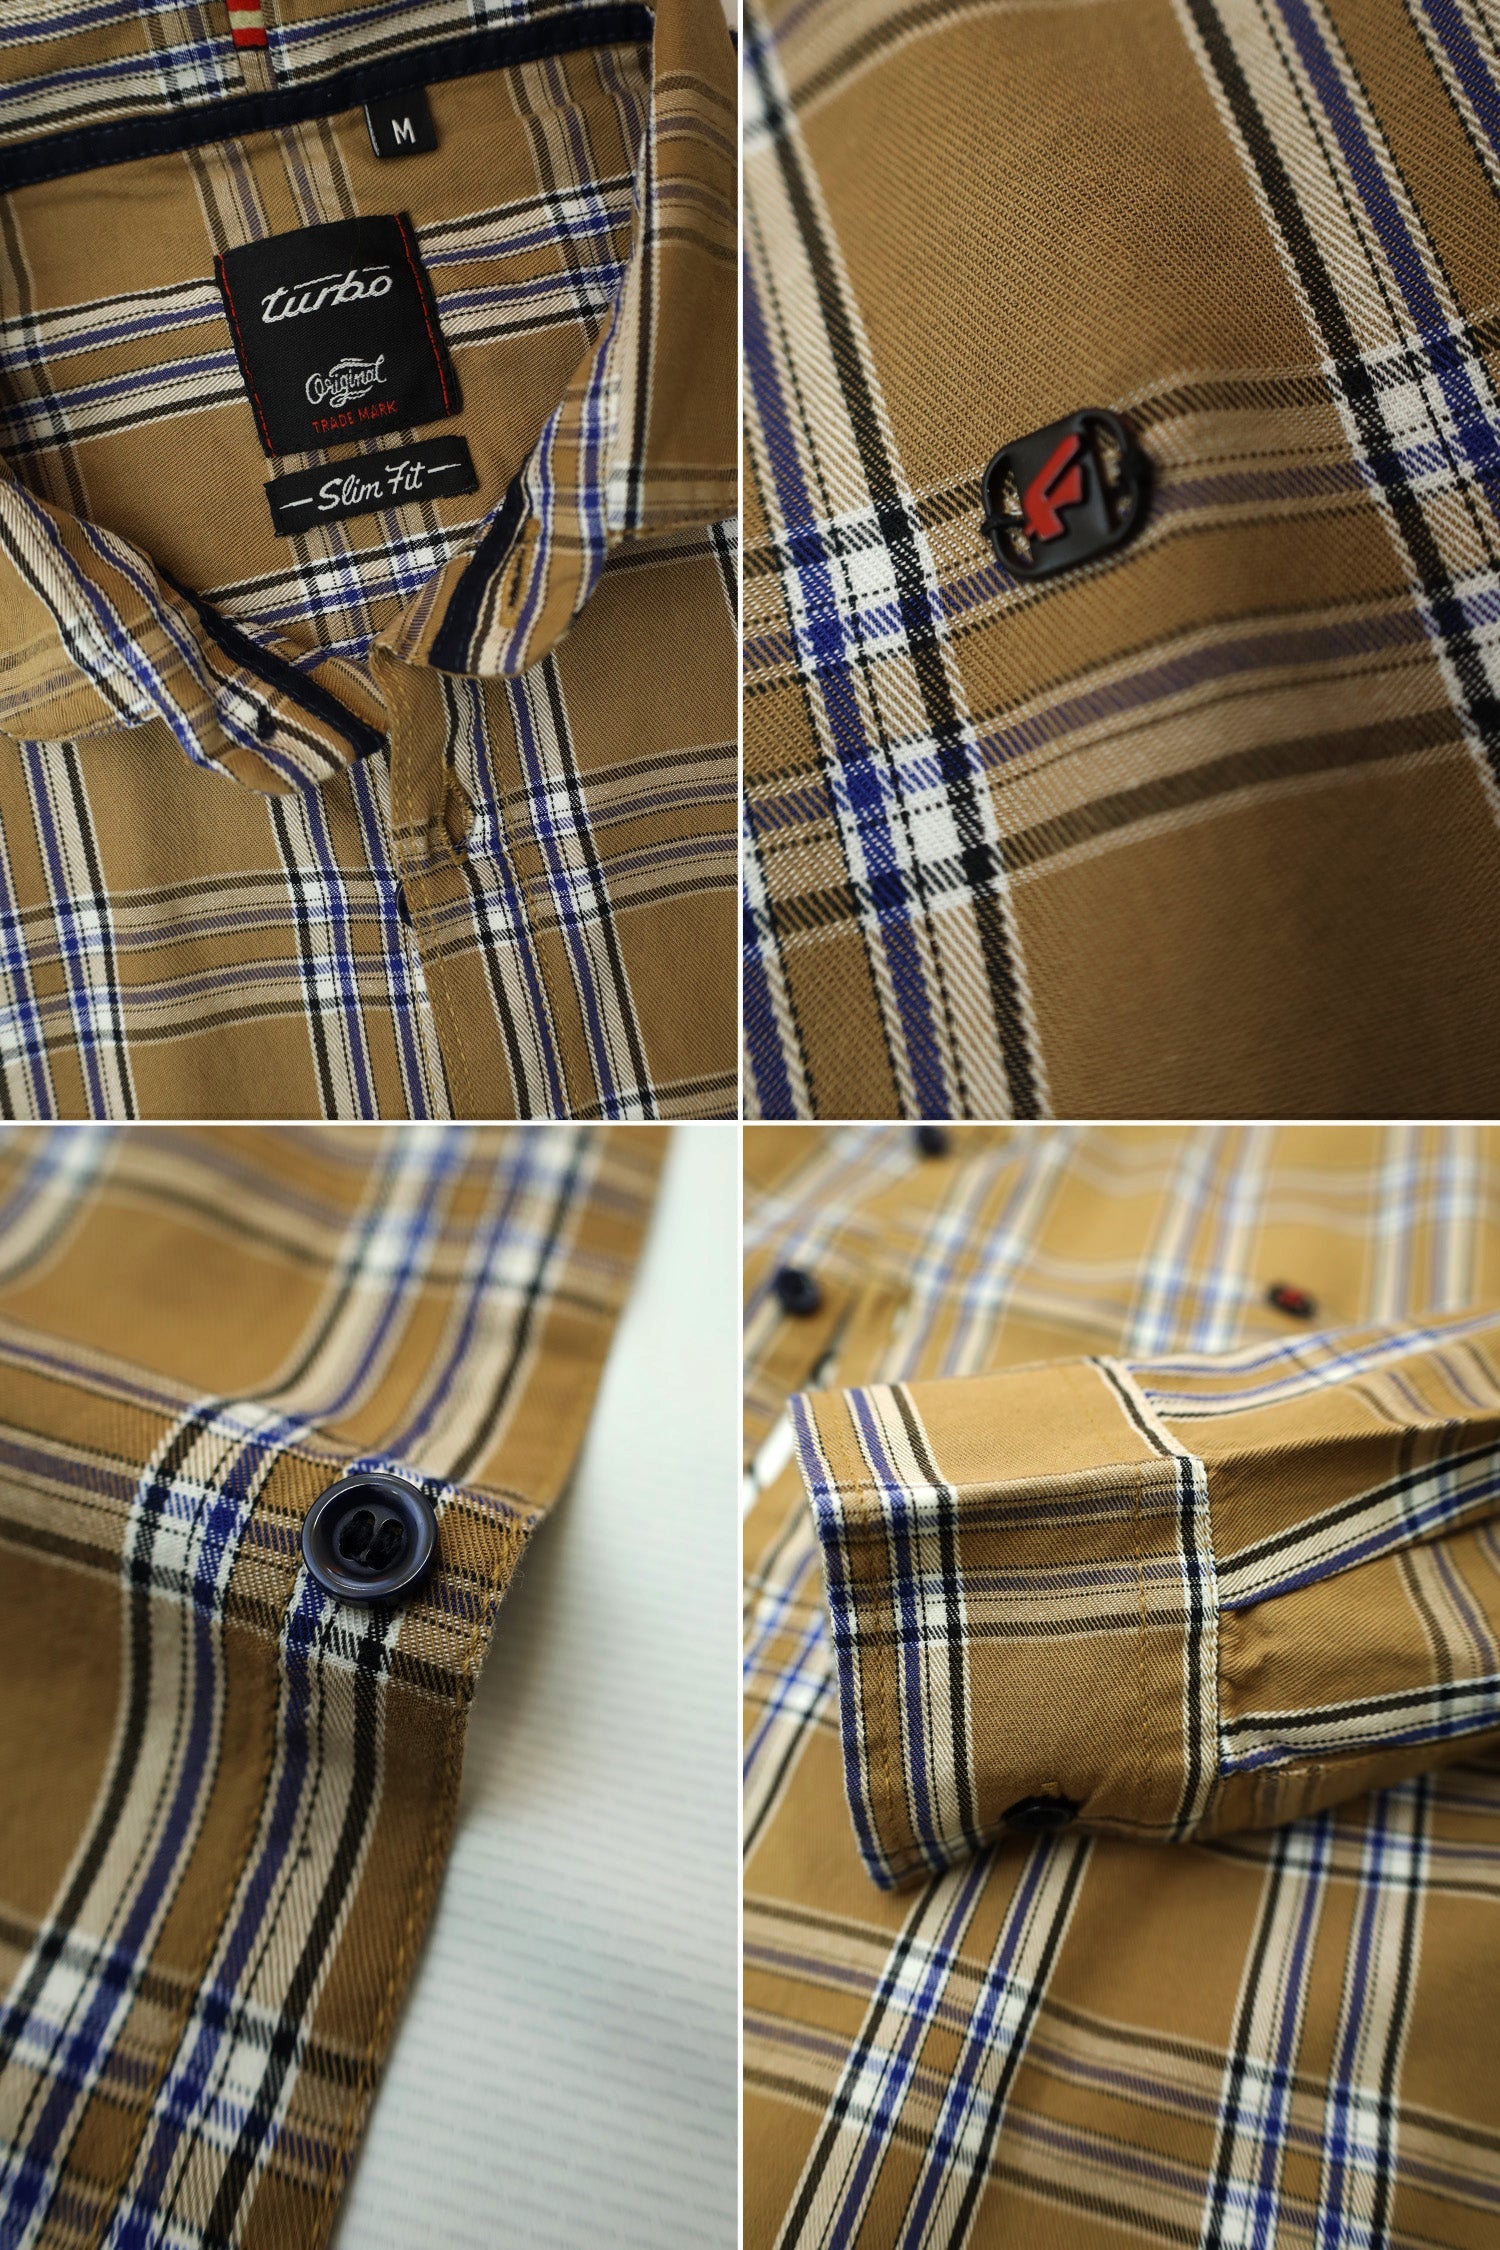 Double Lining Check Full Sleeve Casual Shirt In Camel